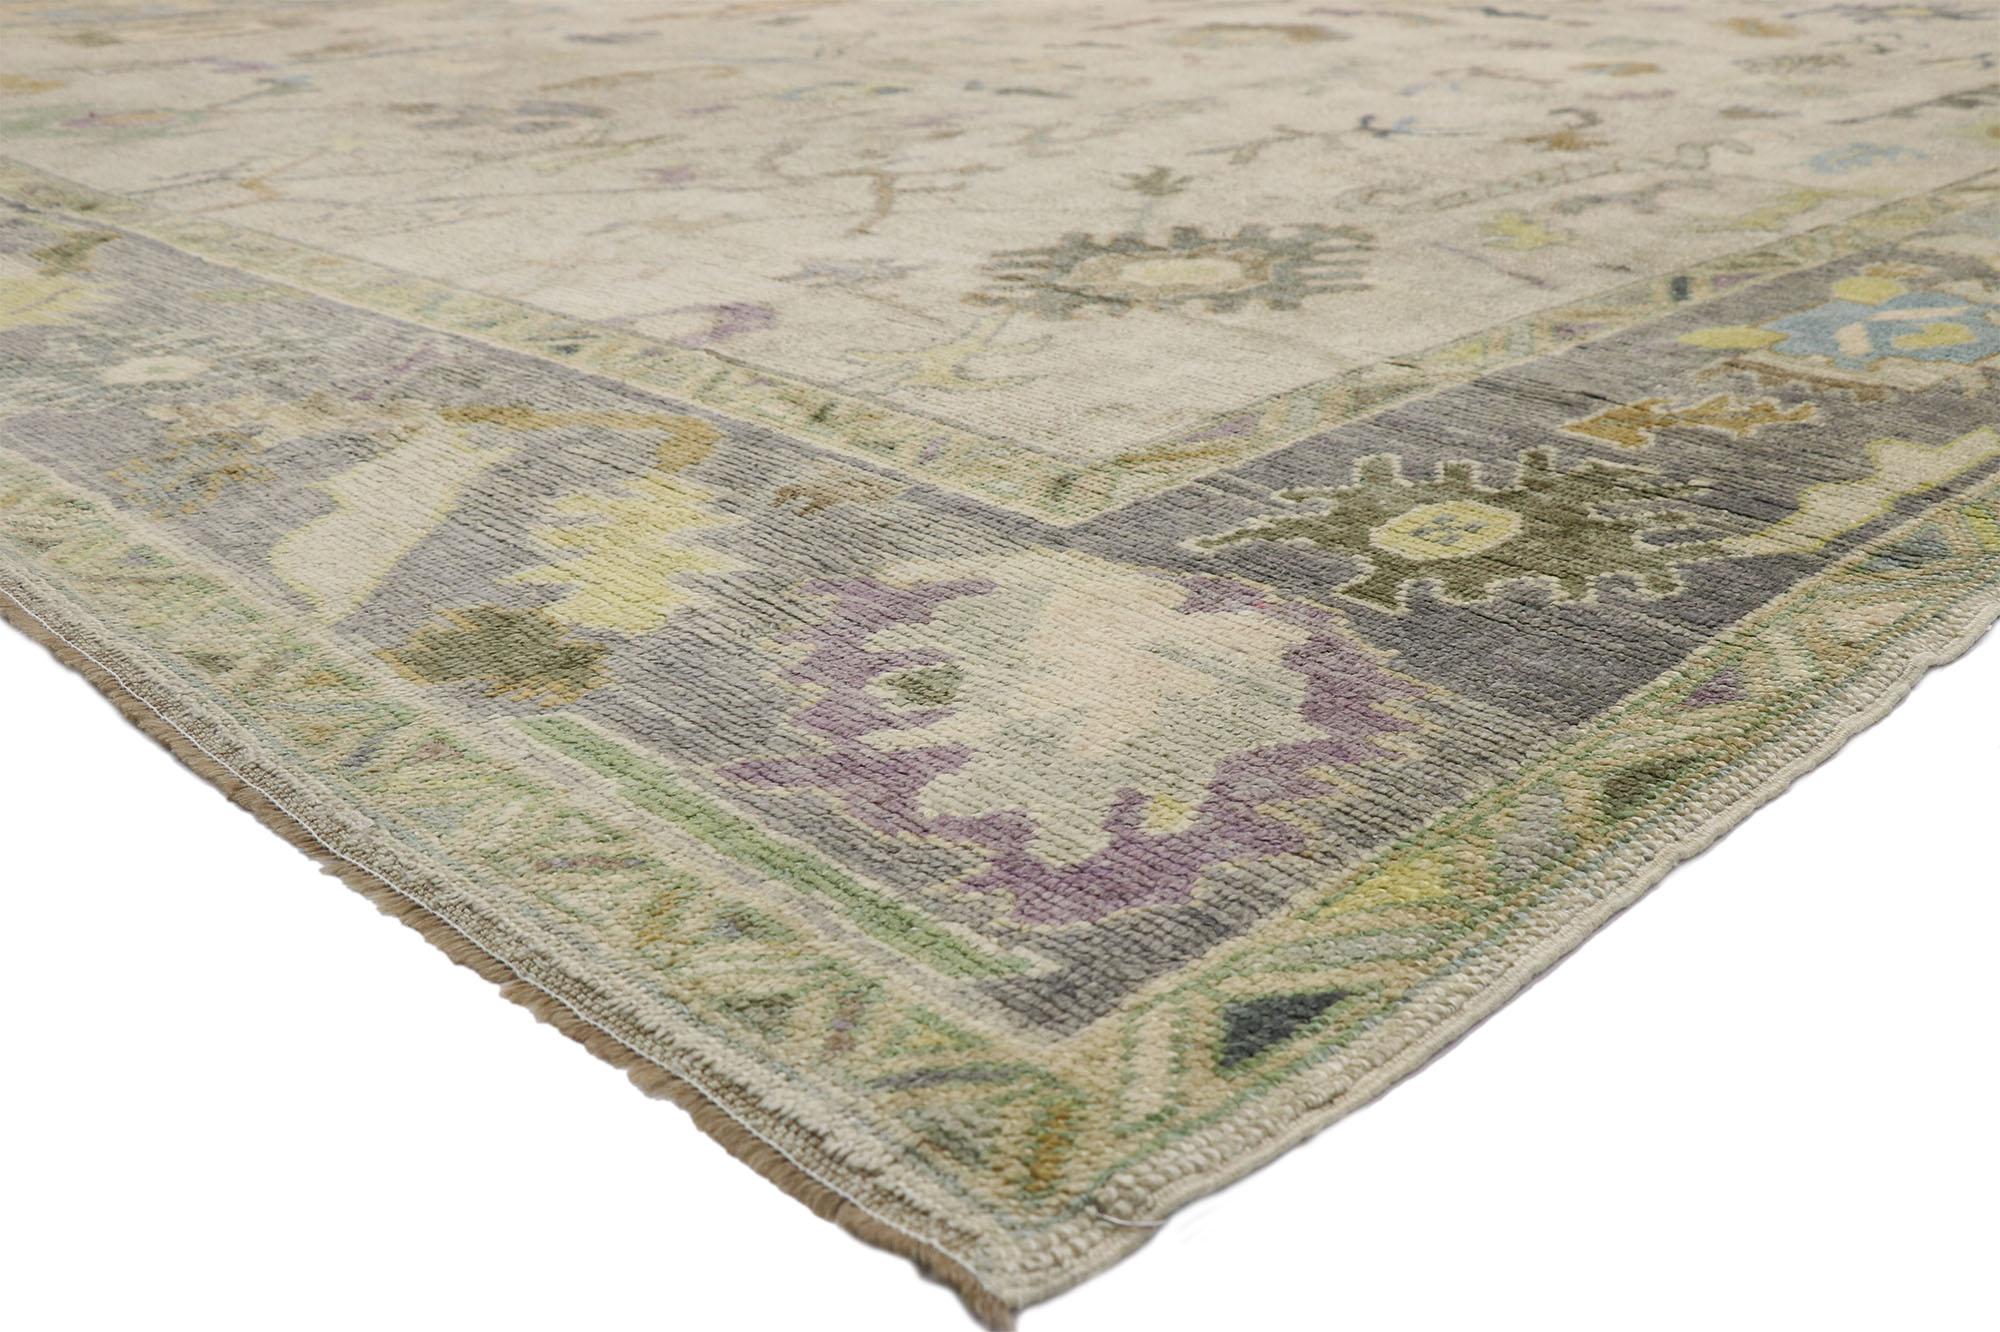 52535, New Contemporary Turkish Oushak Rug with Pastel Colors and French Transitional Style 12'05 x 17'01. Highly stylish yet tastefully casual, this new colorful Turkish Oushak rug features an all-over geometric pattern composed of Harshang motifs,